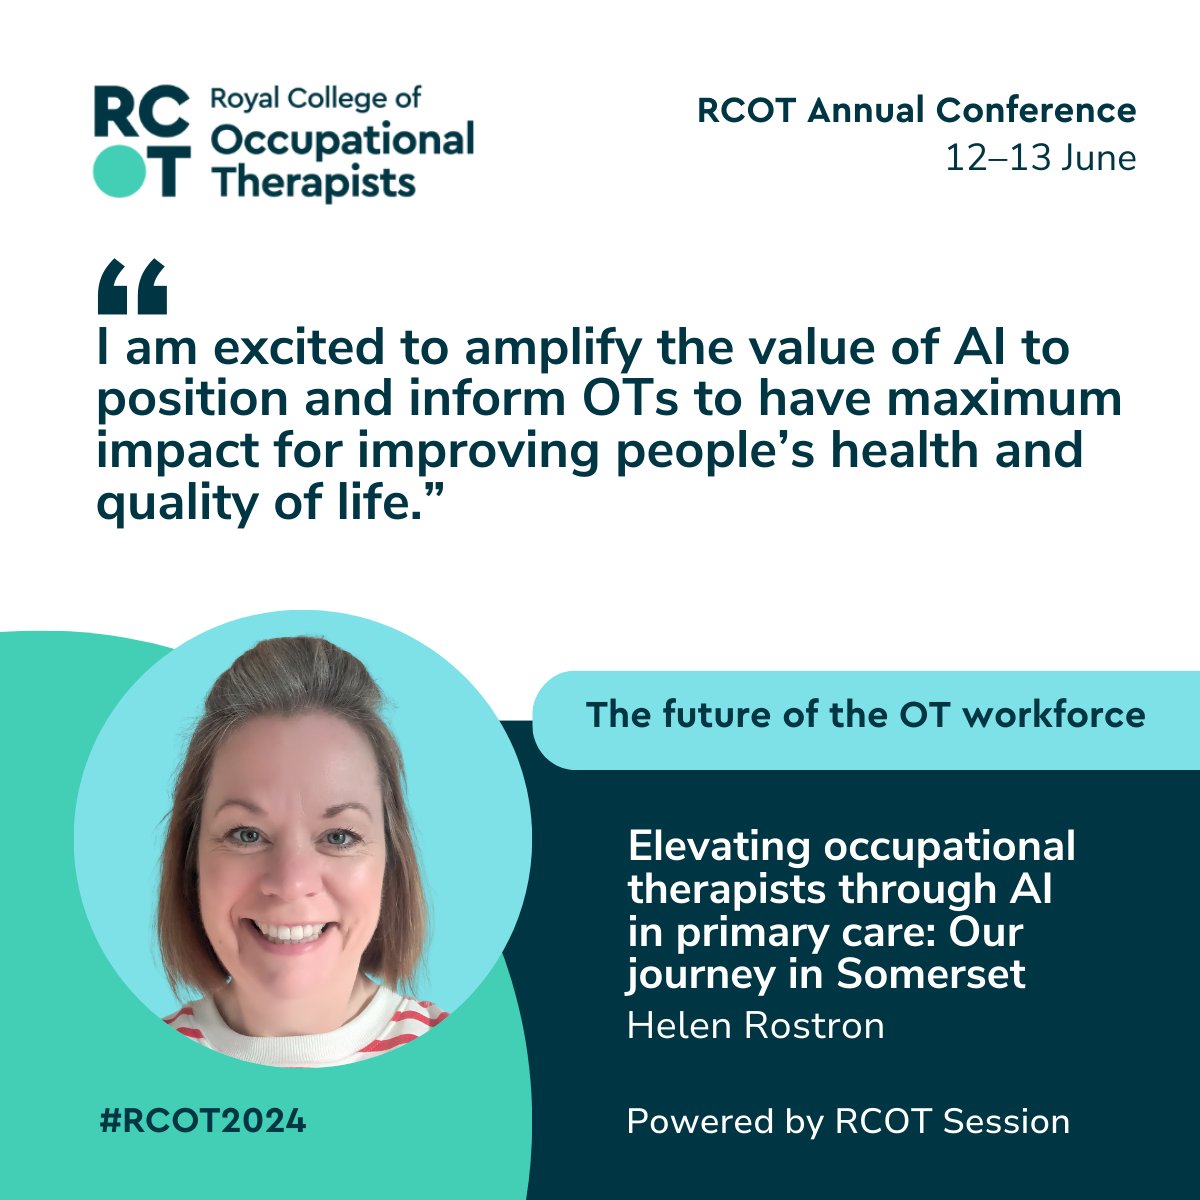 'When I first worked with AI, it filled me with fear! Now, it’s central to my work.' ⭐

We're so excited to hear how AI is transforming primary care in somerset and elevating occupational therapists as leaders. You won't want to miss this at #RCOT2024: loom.ly/sUDgbnY